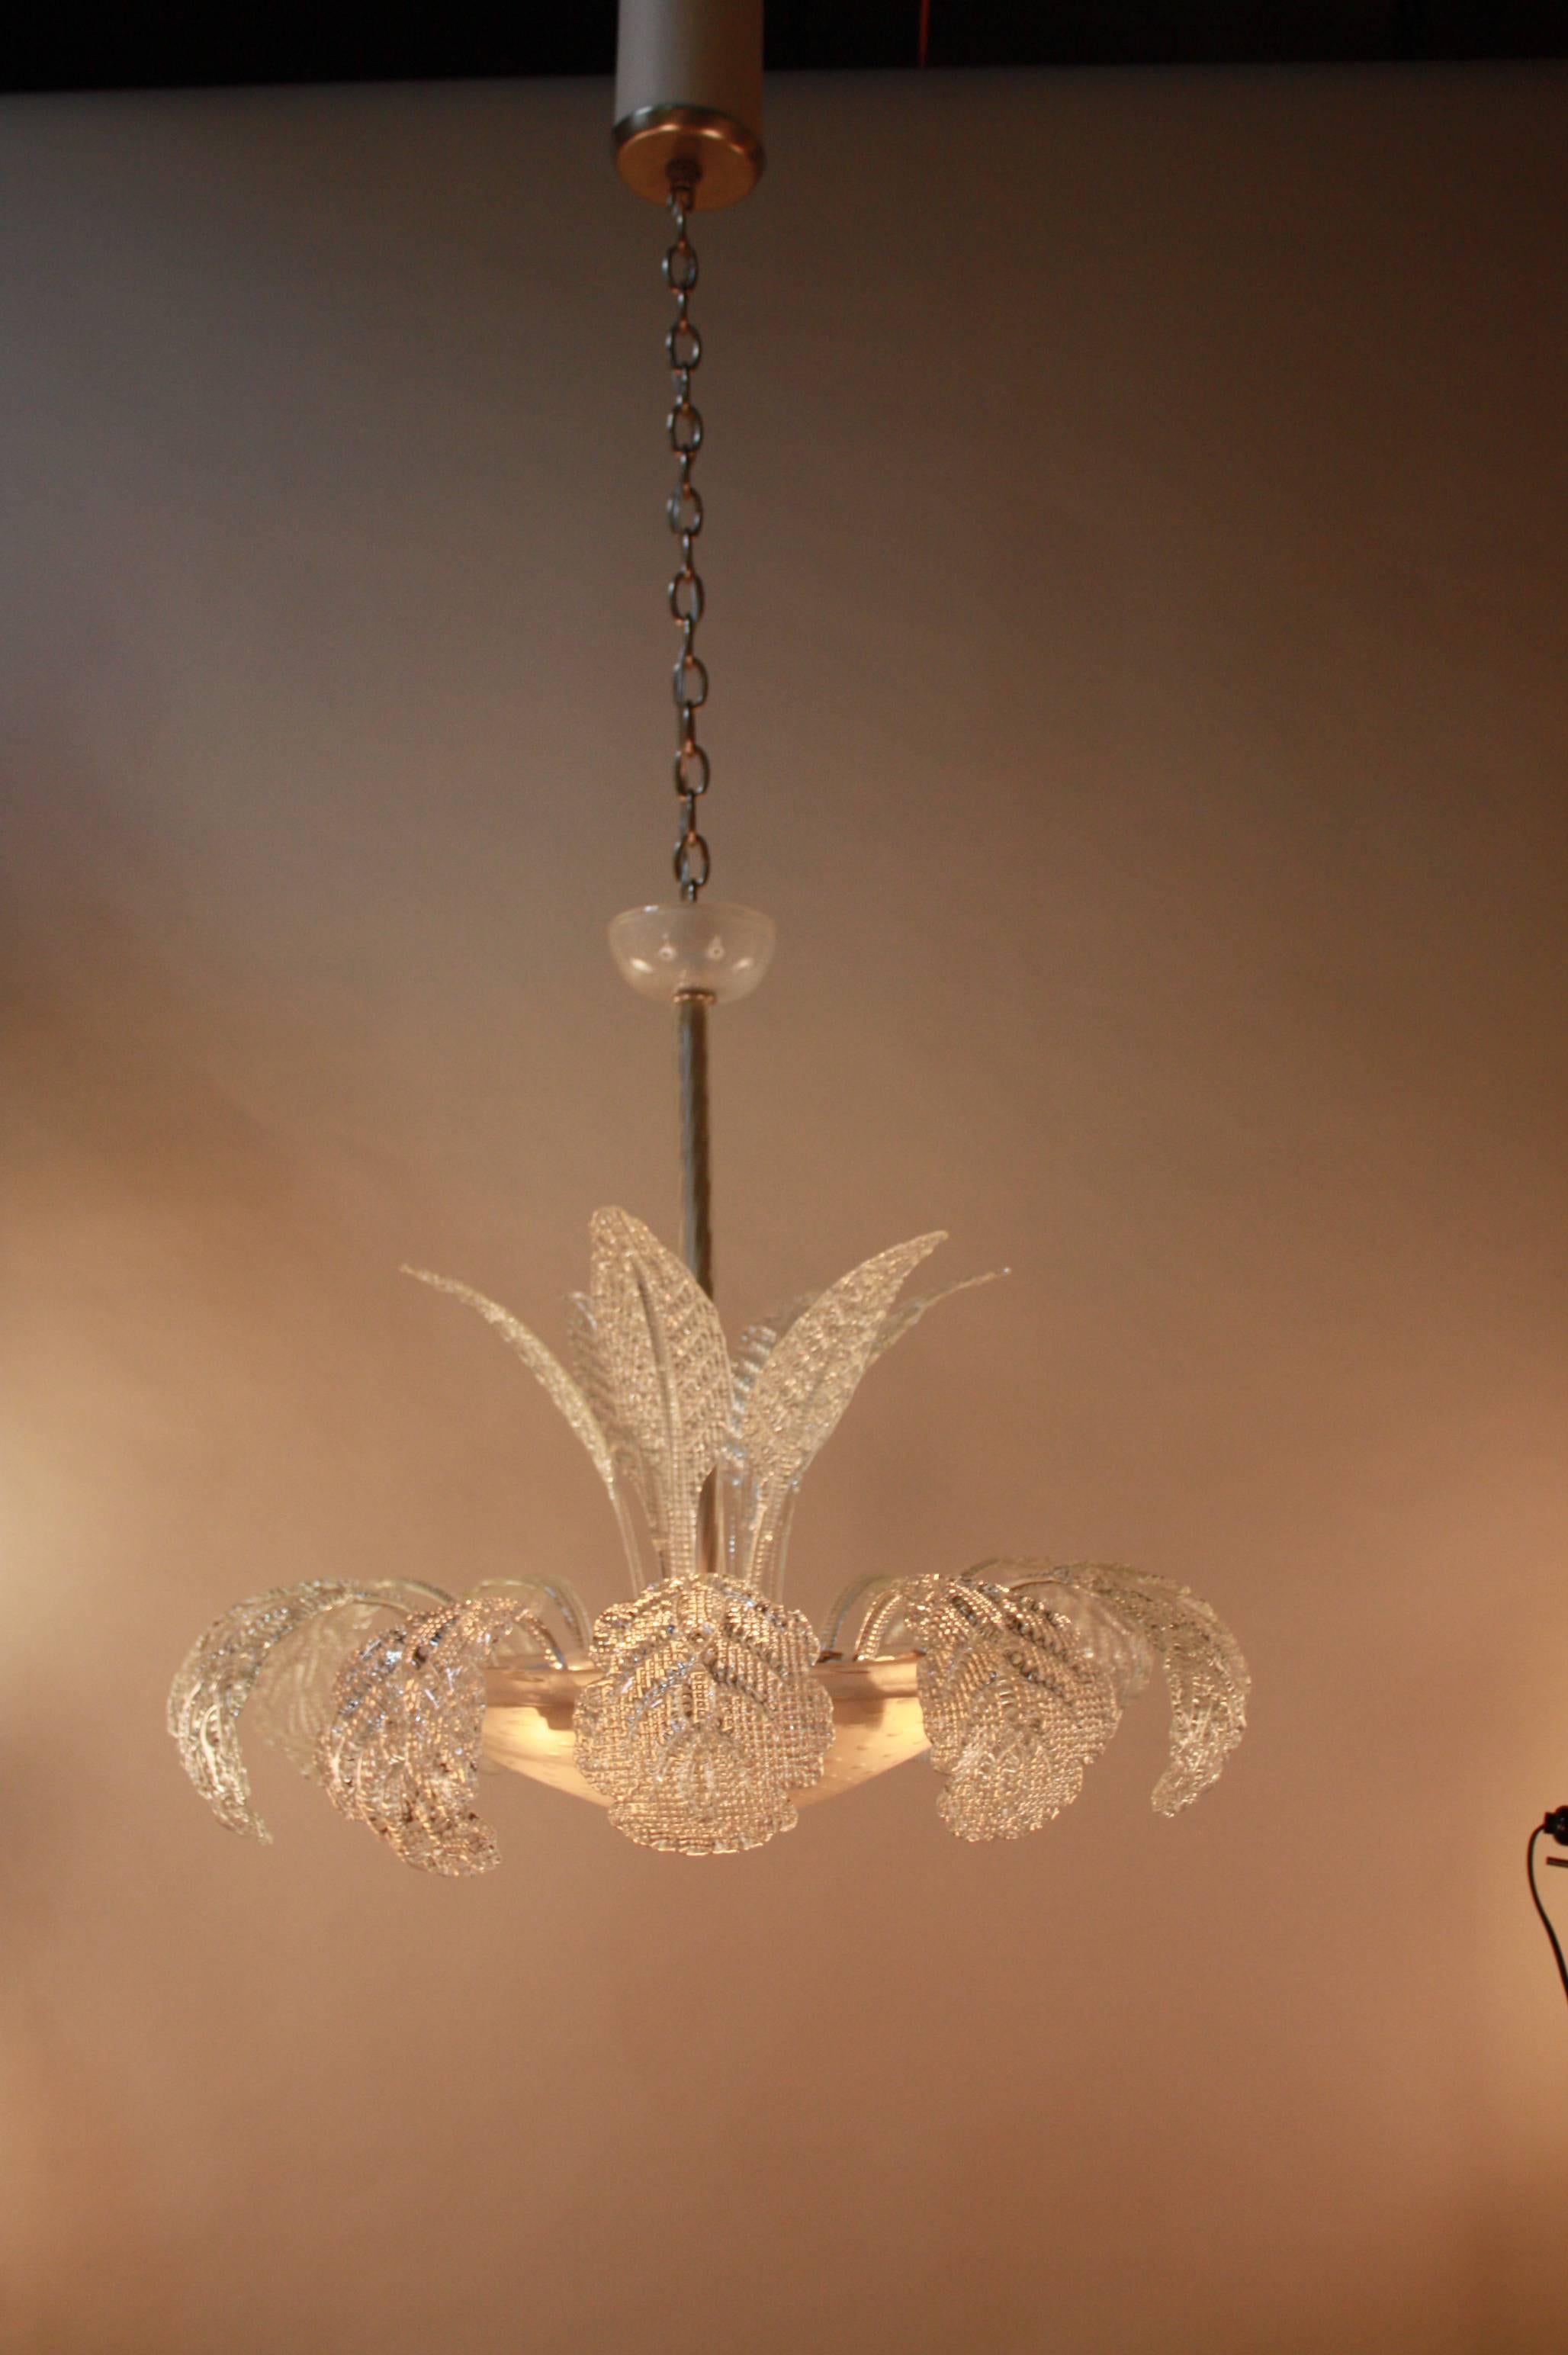 Exquisite handblown Murano glass eighteen leaves six-light chandelier by Barovier & Toso. This chandelier is 29" wide, 32" height with some extra chain.